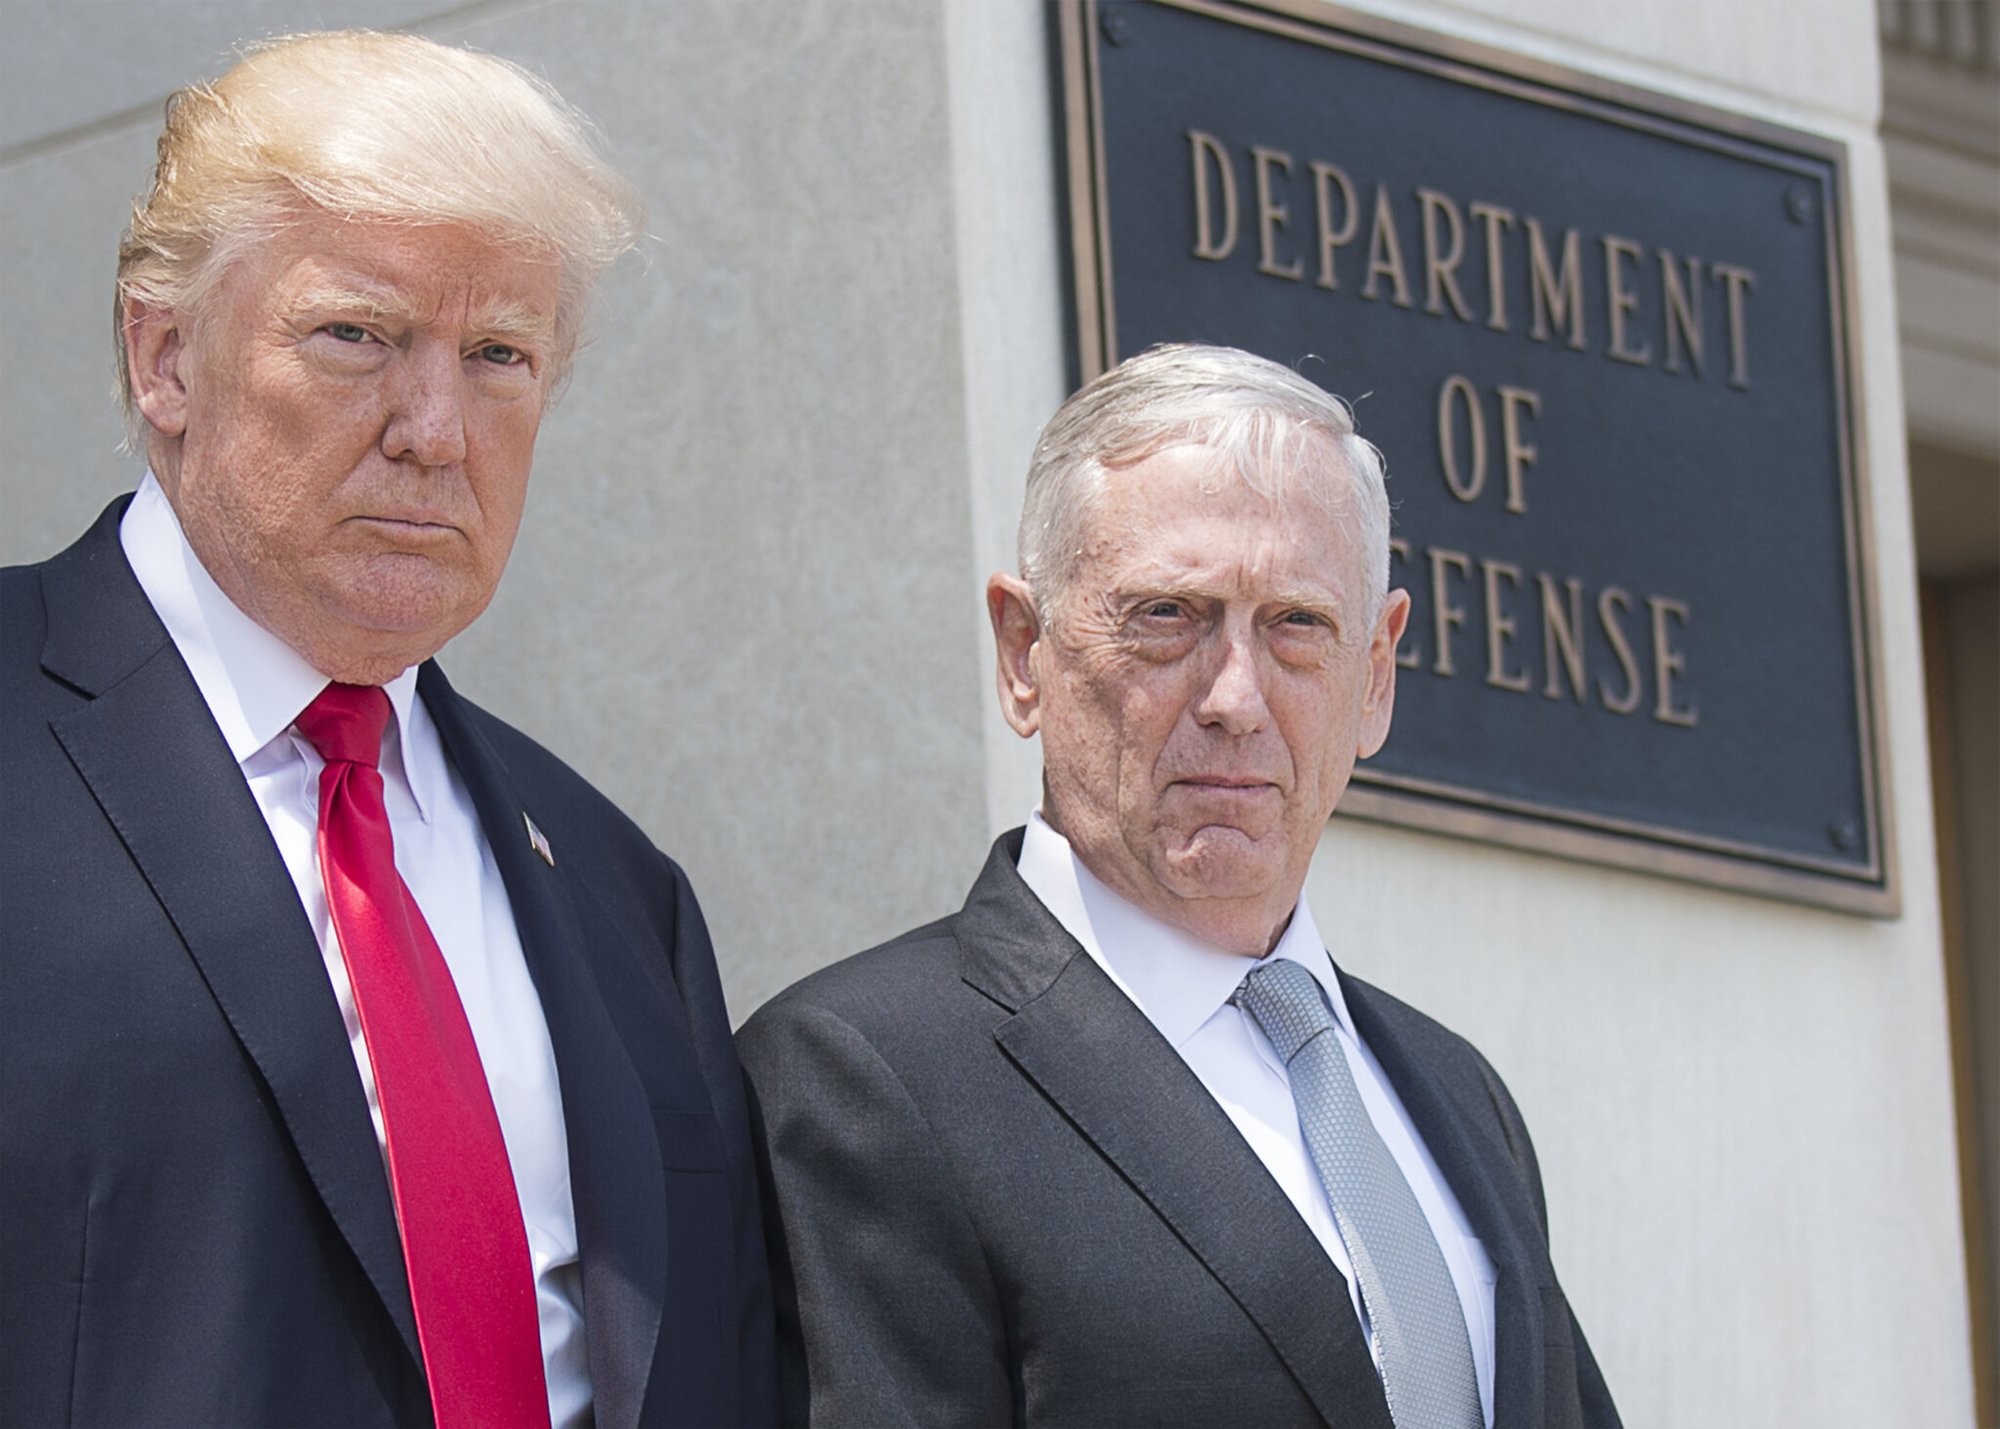 Secretary of Defense Jim Mattis, President Donald Trump and Vice President Mike Pence depart the Pentagon following a meeting of the National Security Council in Washington, D.C., July 20, 2017. (DOD photo by U.S. Navy Petty Officer 2nd Class Dominique A. Pineiro)